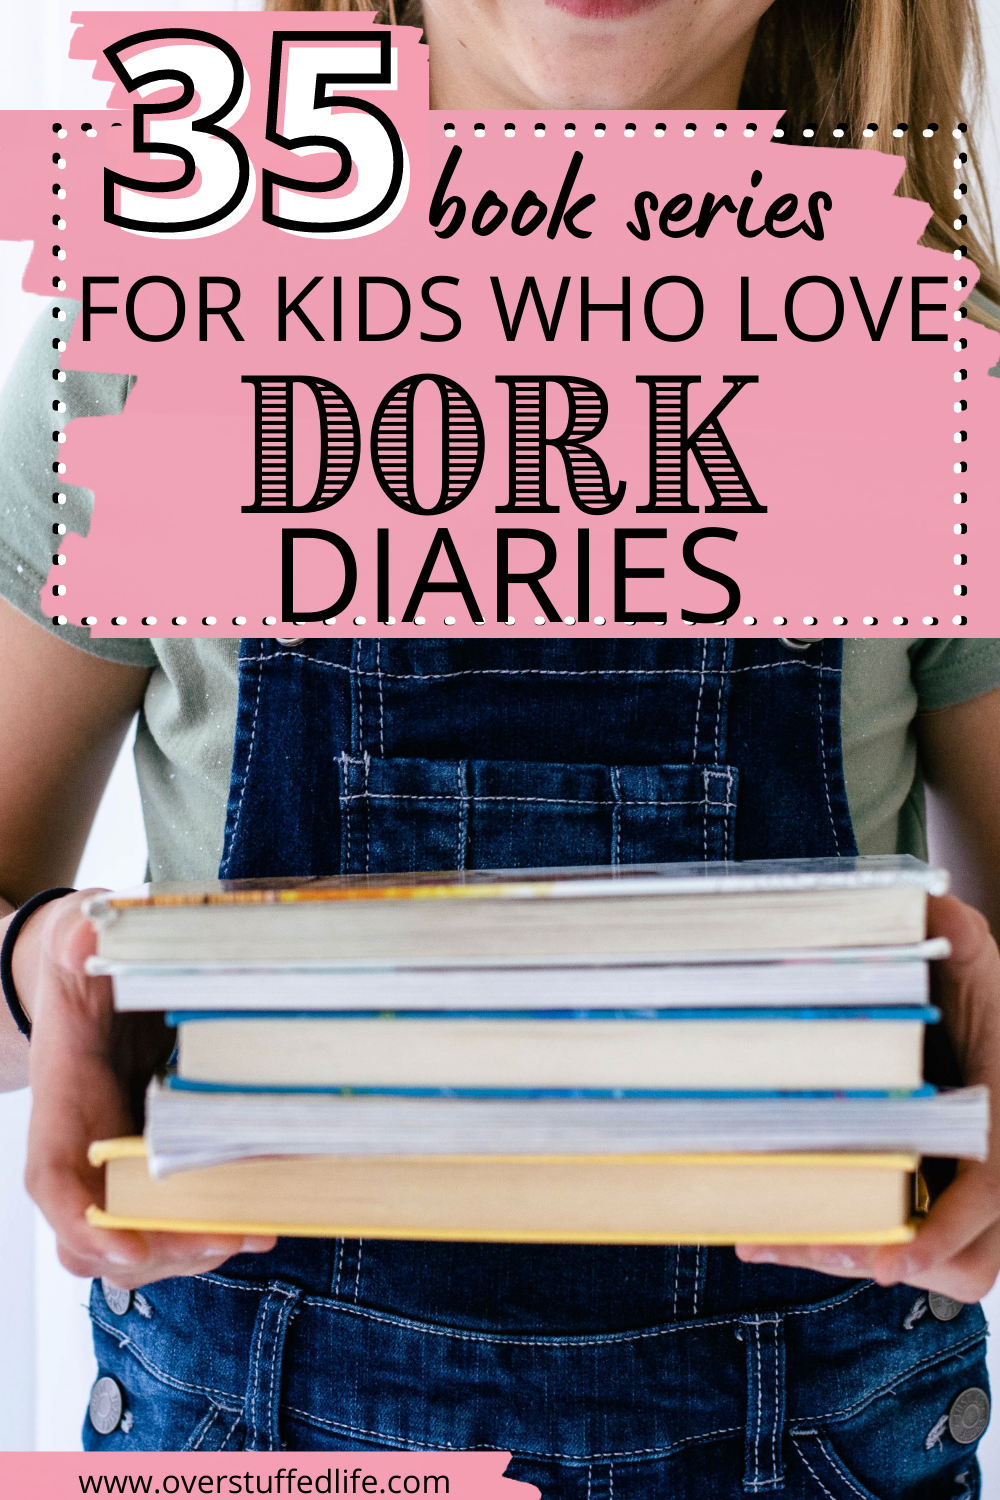 Looking for Dork Diaries read alikes? Here are 35 book series that appeal to kids who love graphic novels and diary style books.